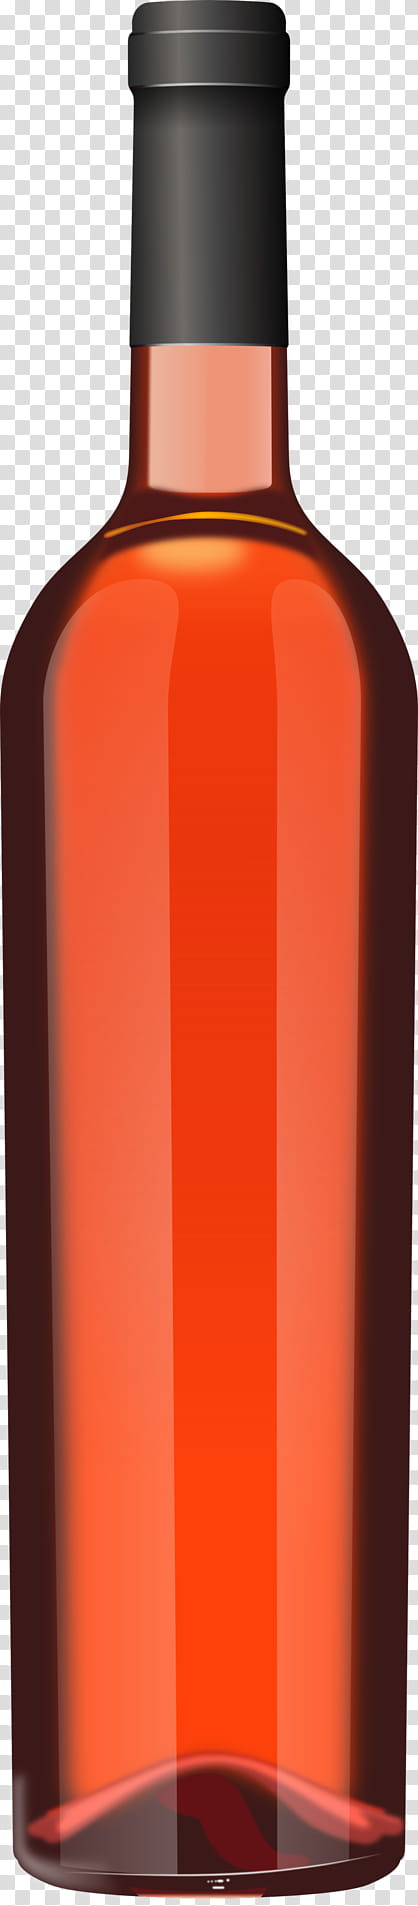 red wine bottle, brown and black bottle close-up transparent background PNG clipart